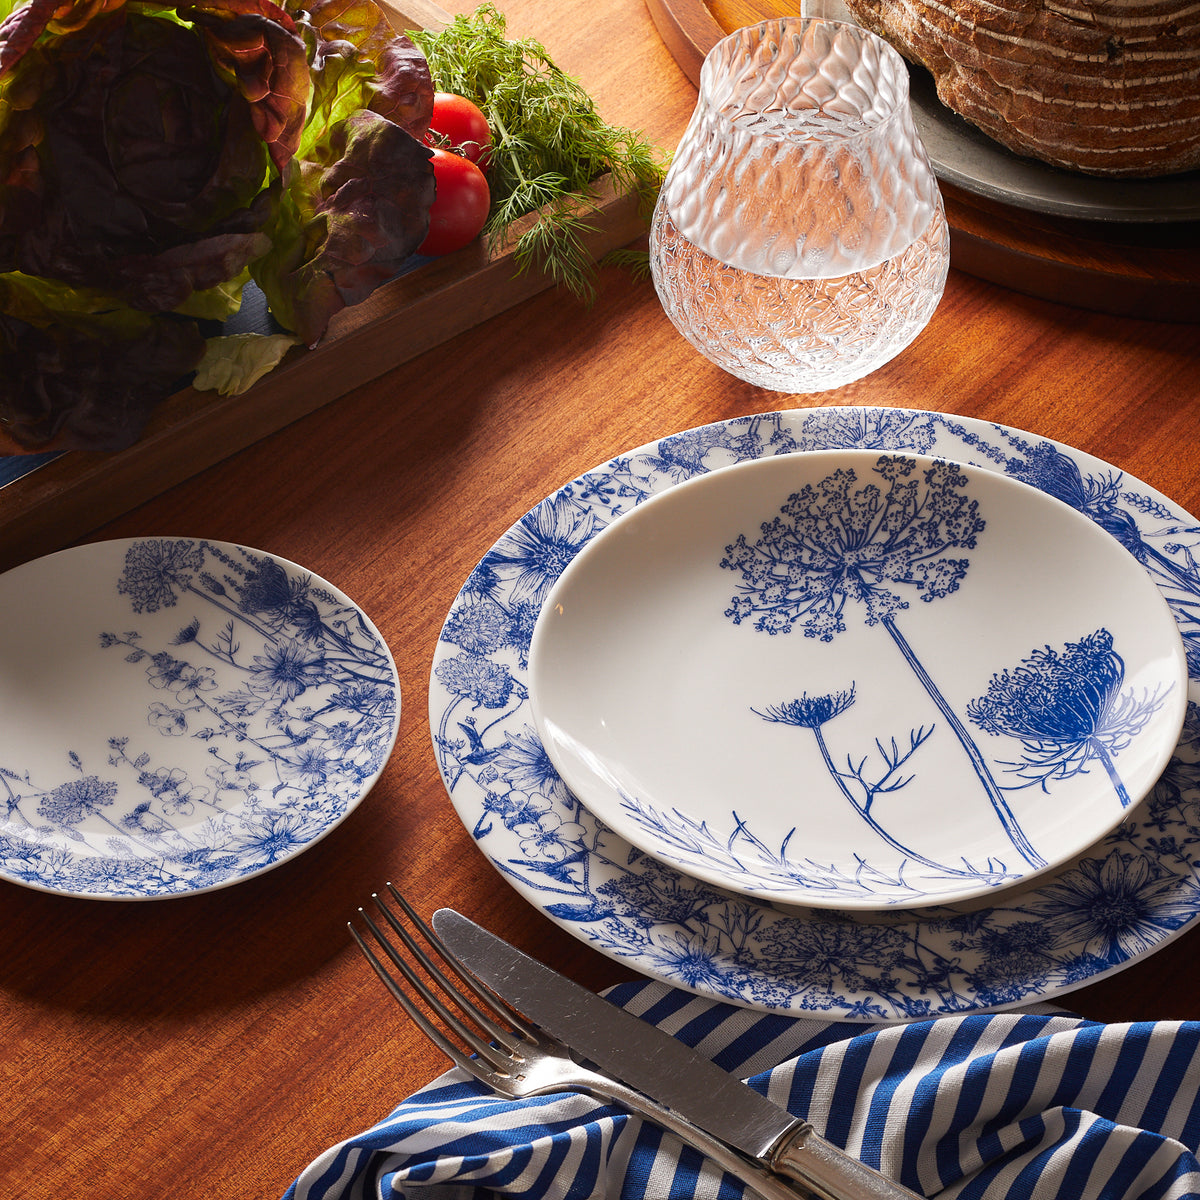 A wooden table set with intricately designed Summer Blues Small Plates by Caskata, a glass of water, a loaf of bread, fresh vegetables, and a striped napkin beside a fork and knife.